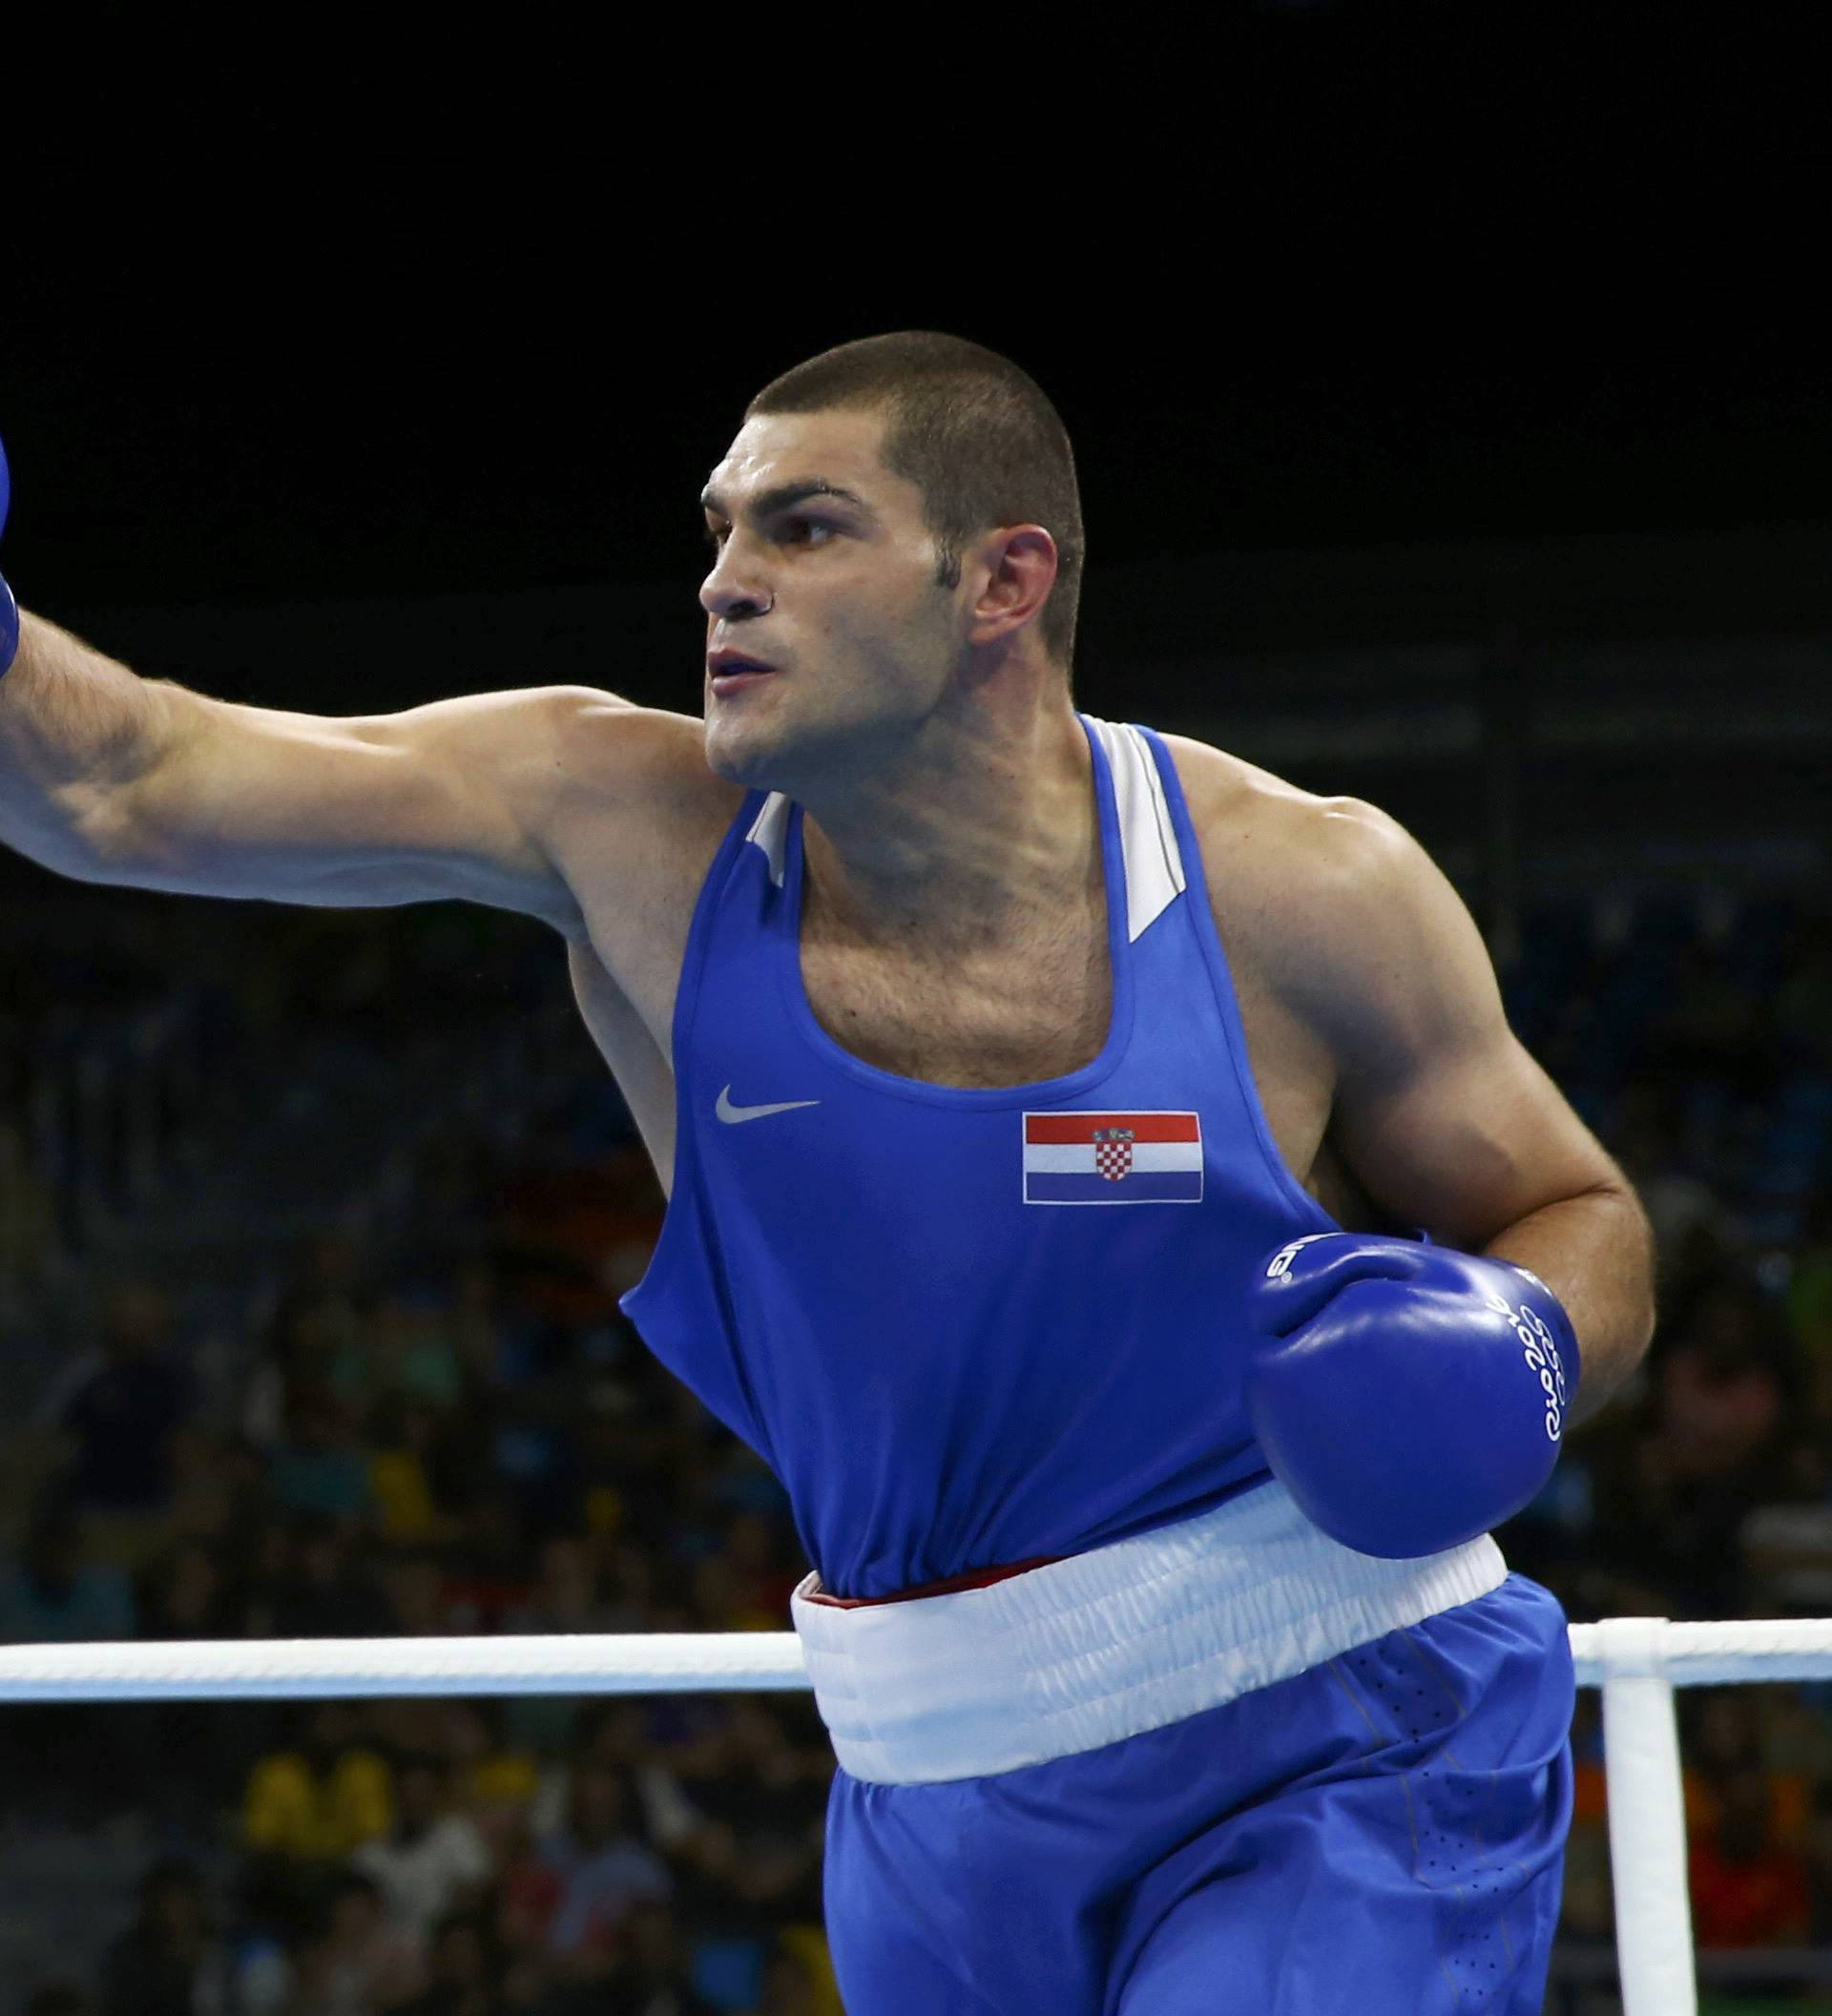 Boxing - Men's Super Heavy (+91kg) Round of 16 Bout 162